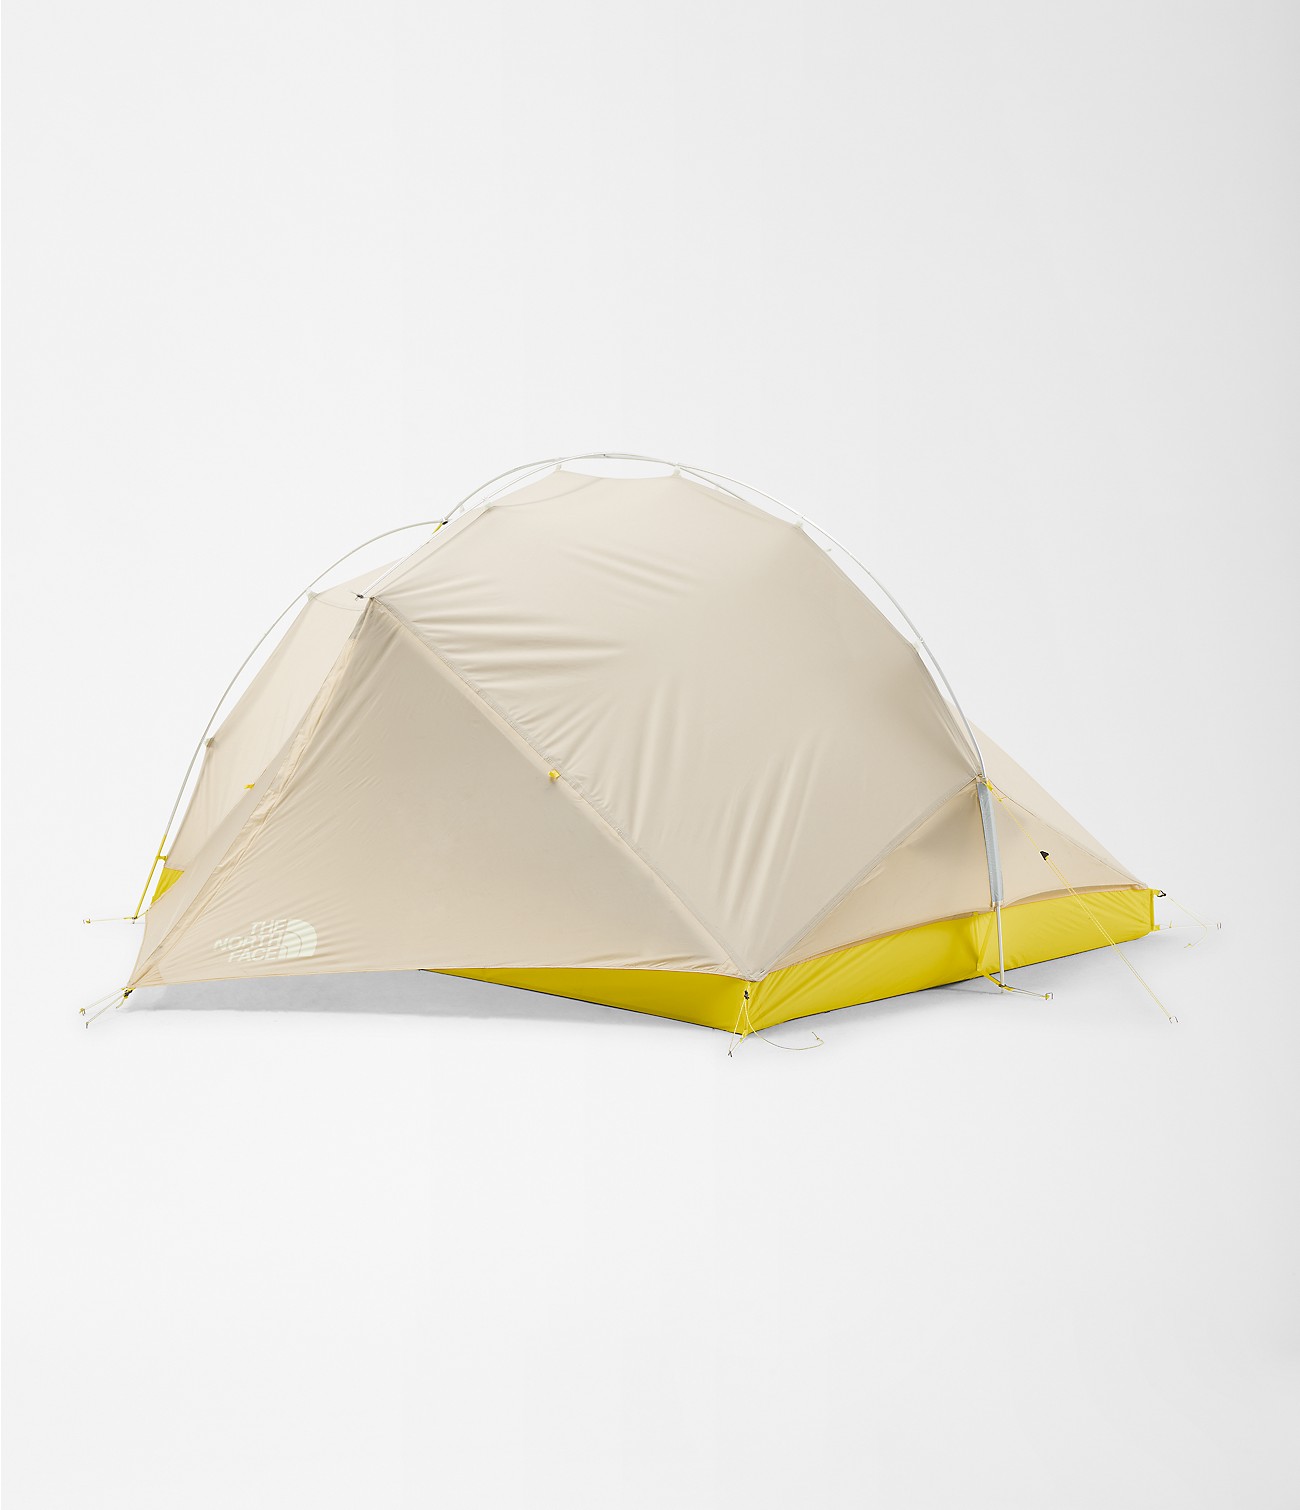 Triarch 2.0 3 Tent | The North Face